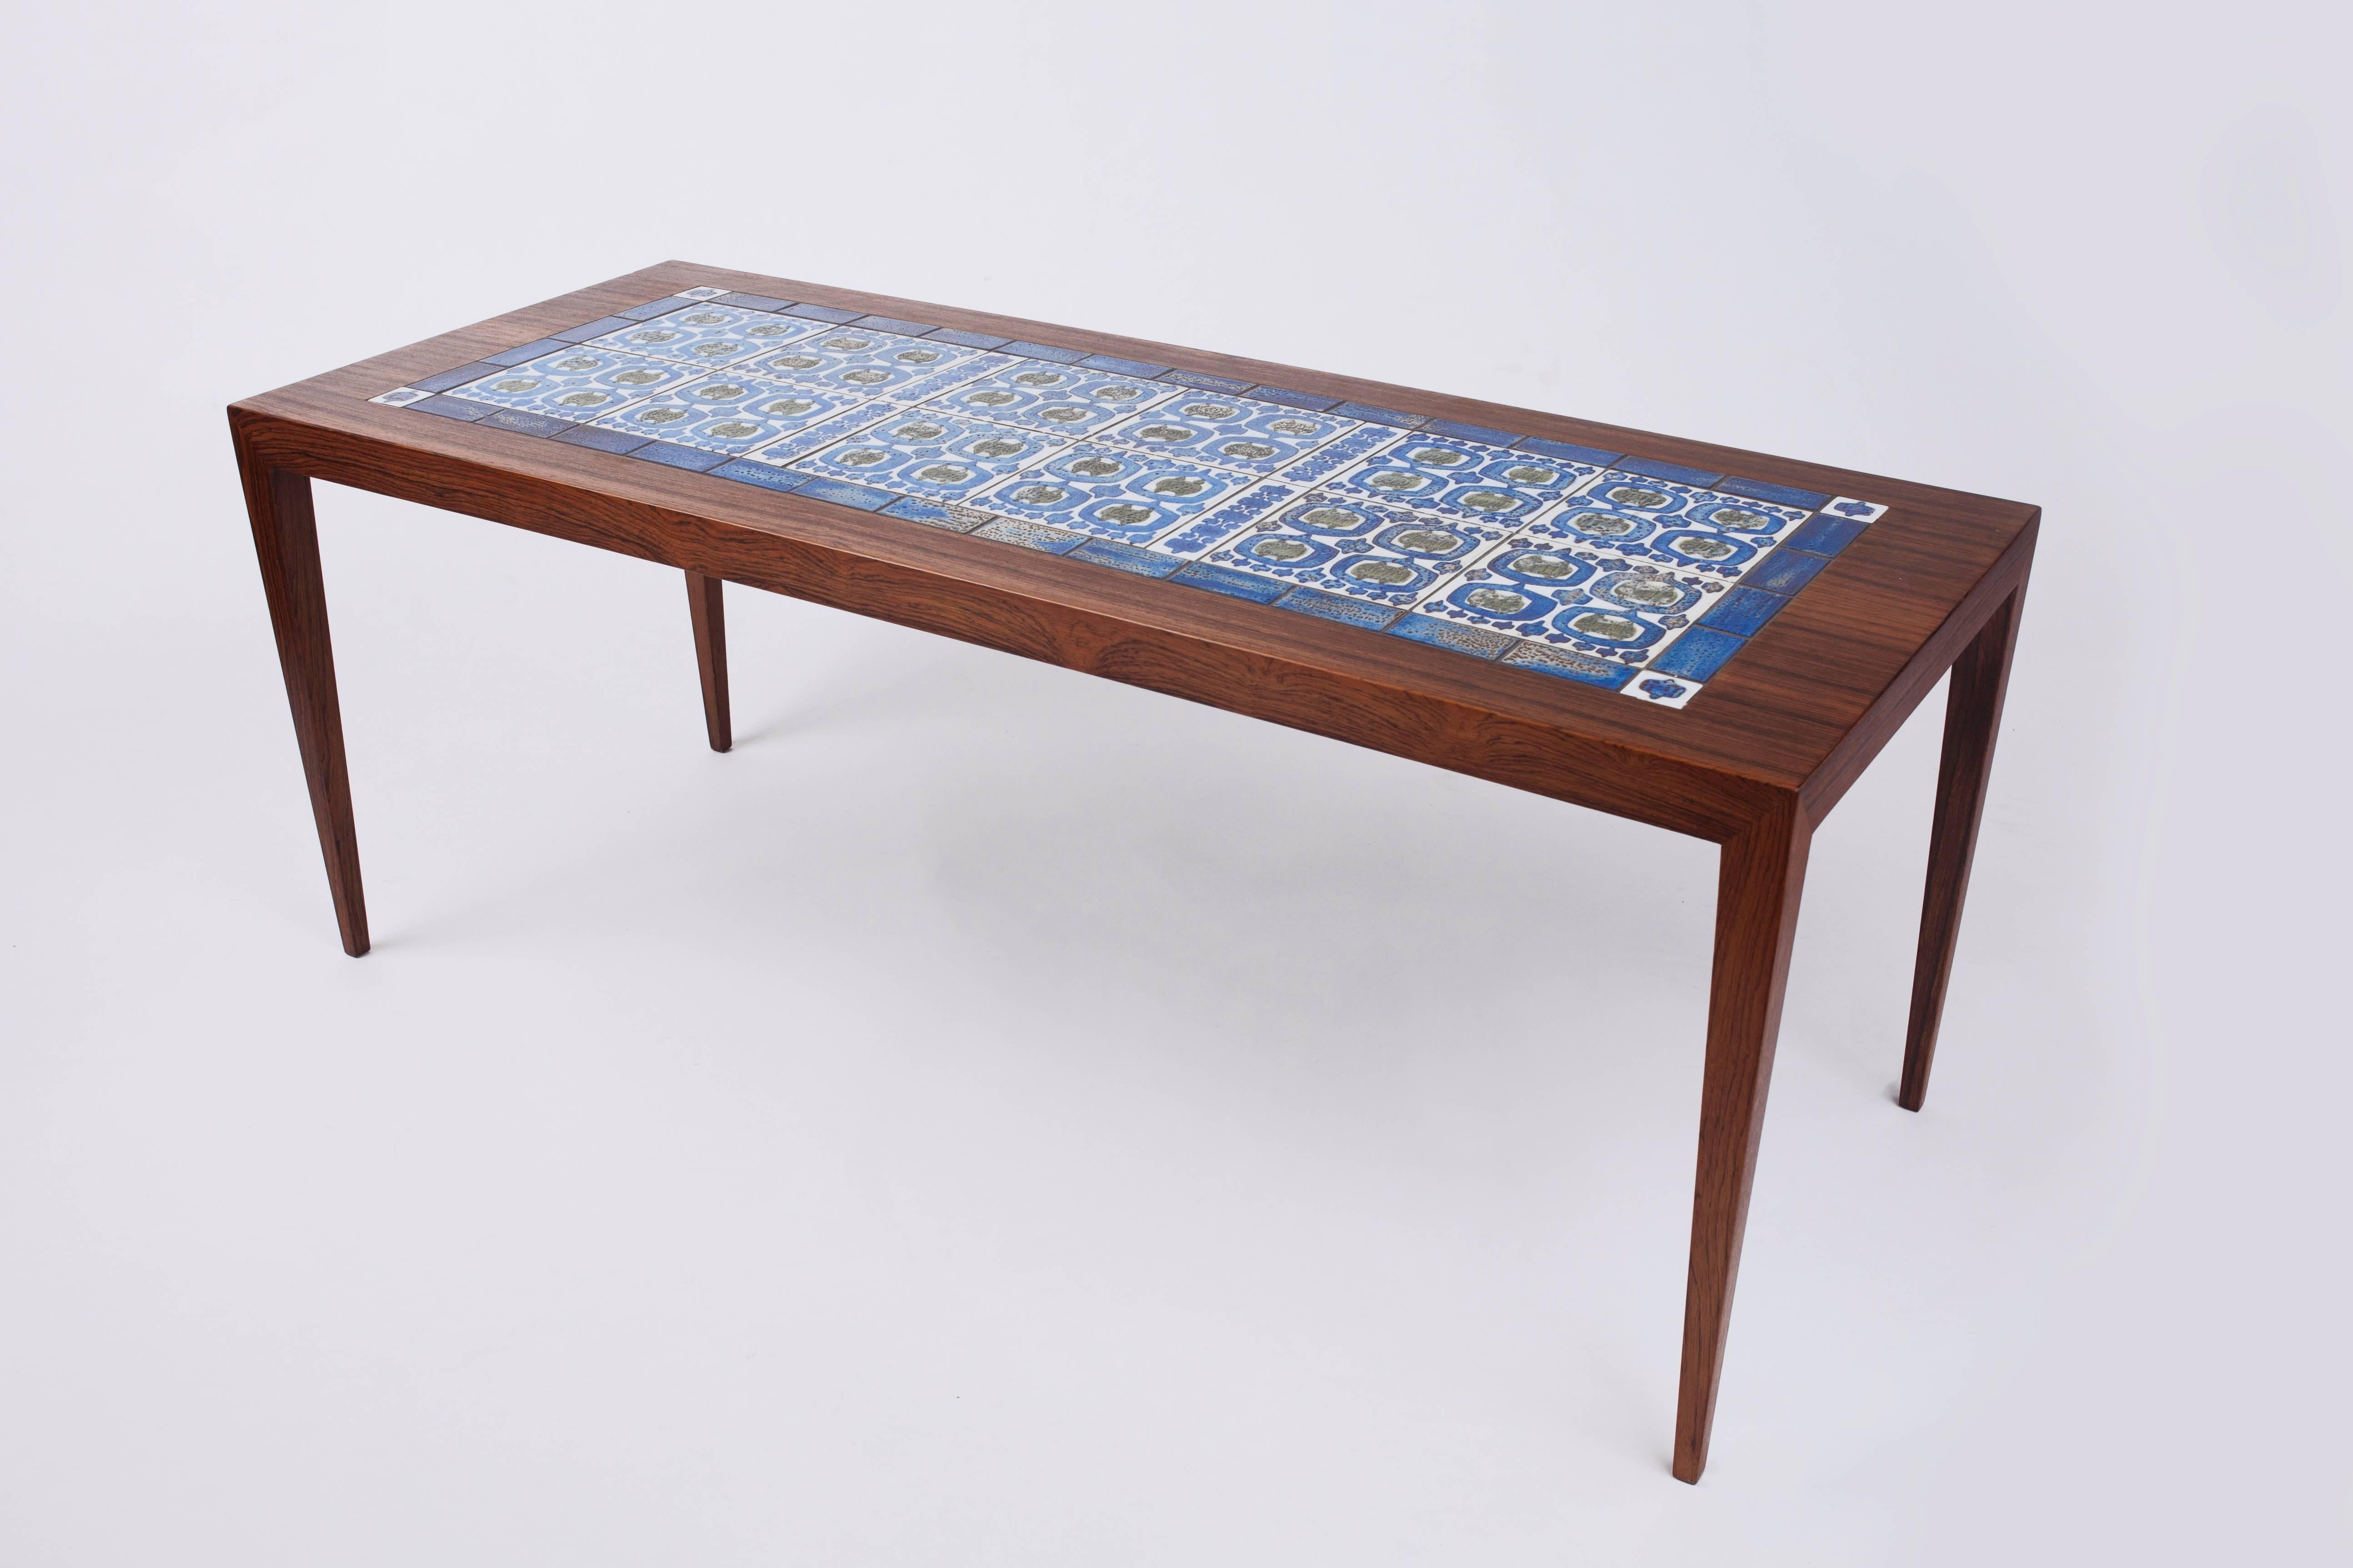 Glazed Rosewood Coffee Table with Blue and Green Ceramic Tiles by Severin Hansen